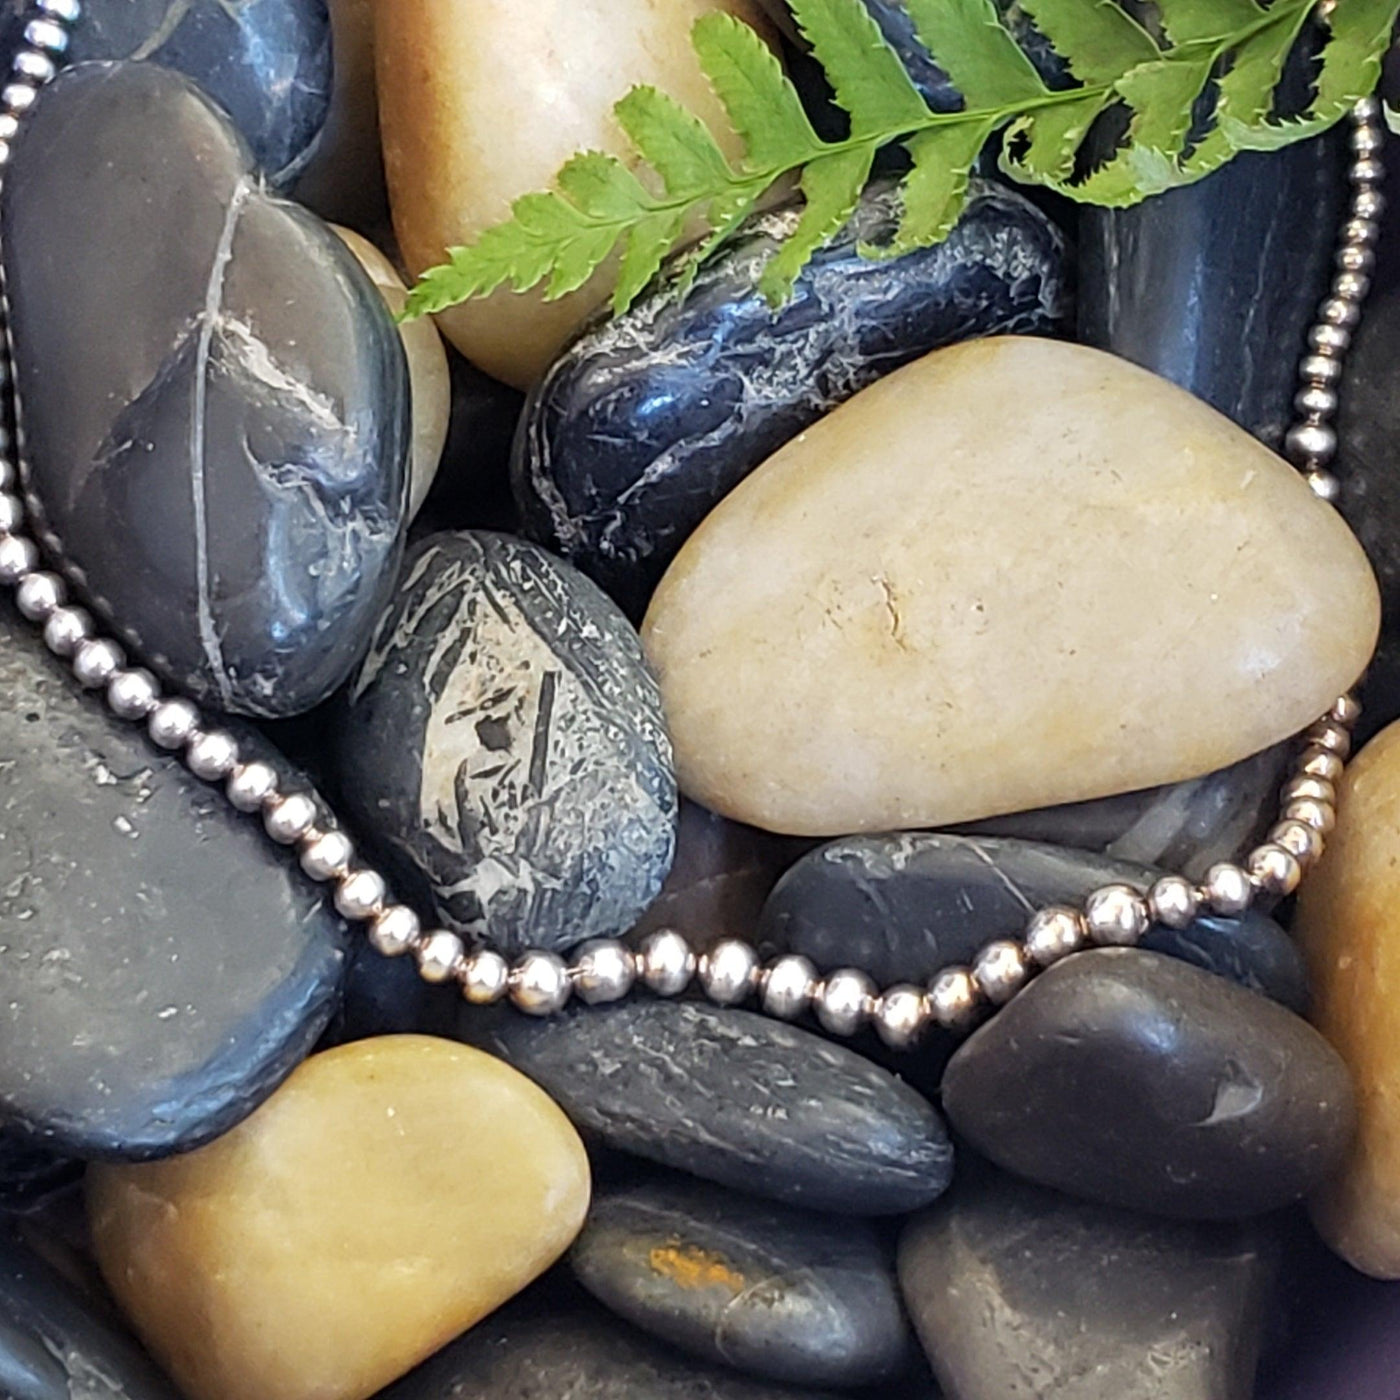 Graduated silver bead necklace